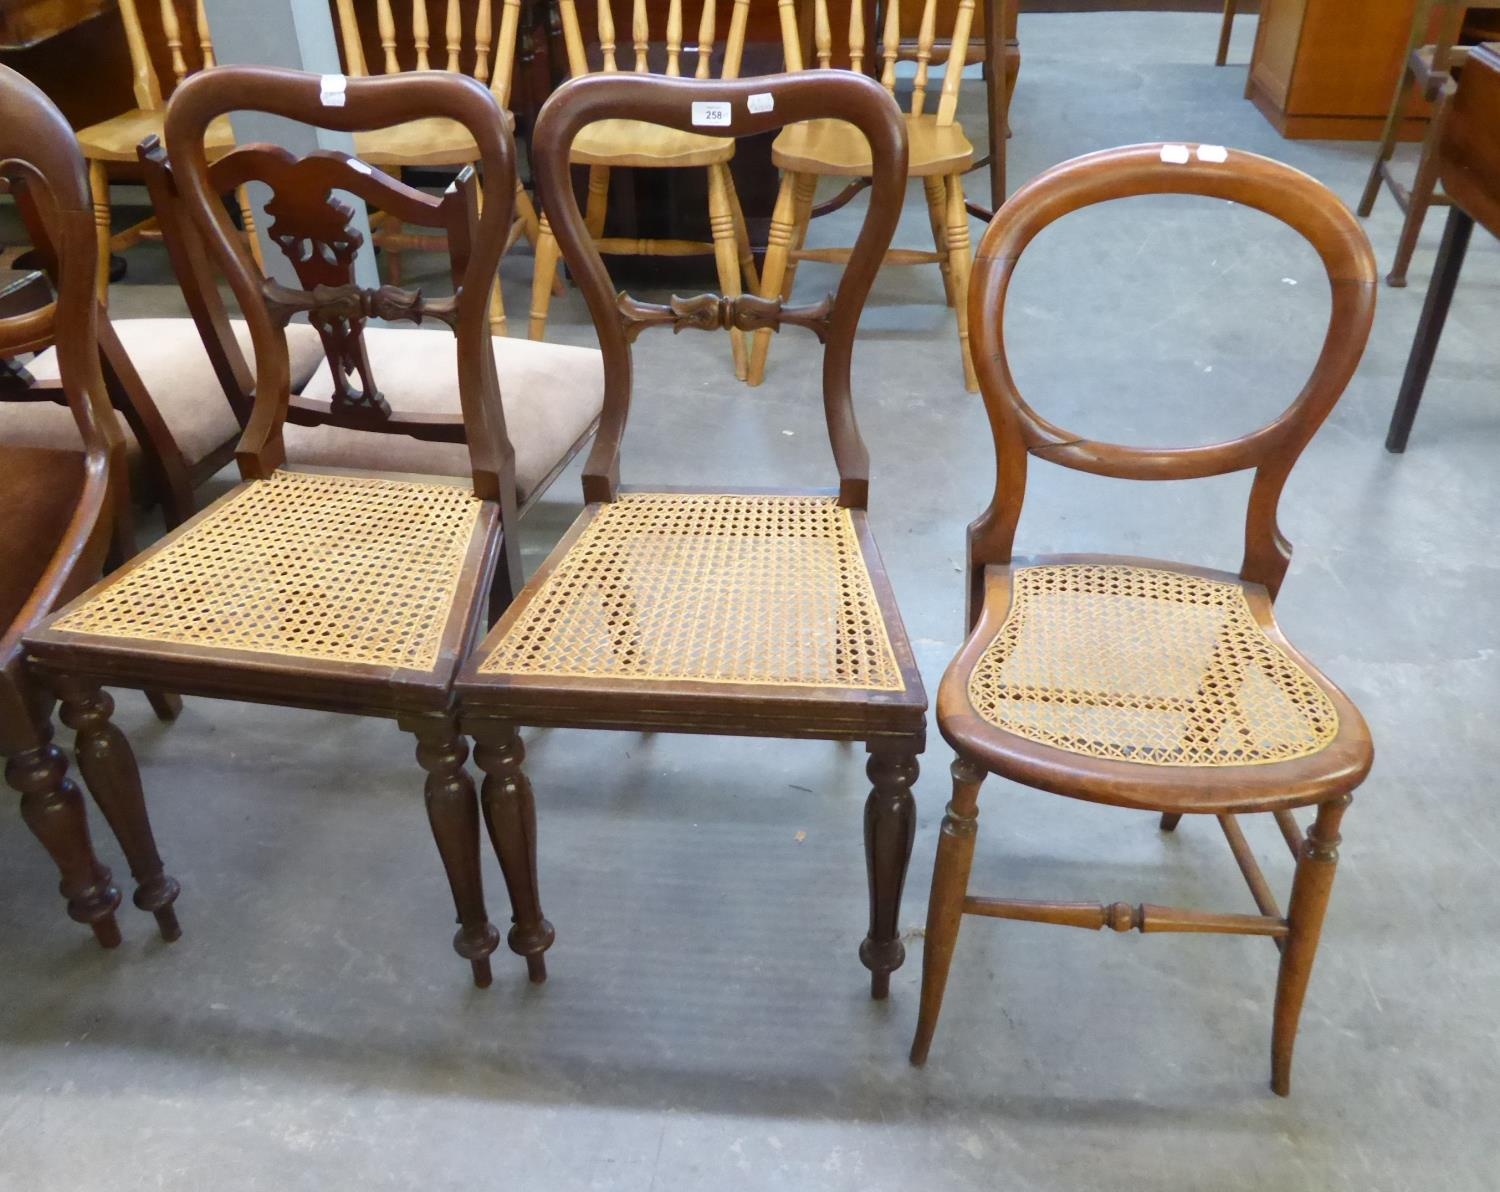 A PAIR OF EARLY VICTORIAN MAHOGANY SPOON-BACK CANE SEATED CHAIRS AND AN EDWARDIAN LOW SEATED DRAWING